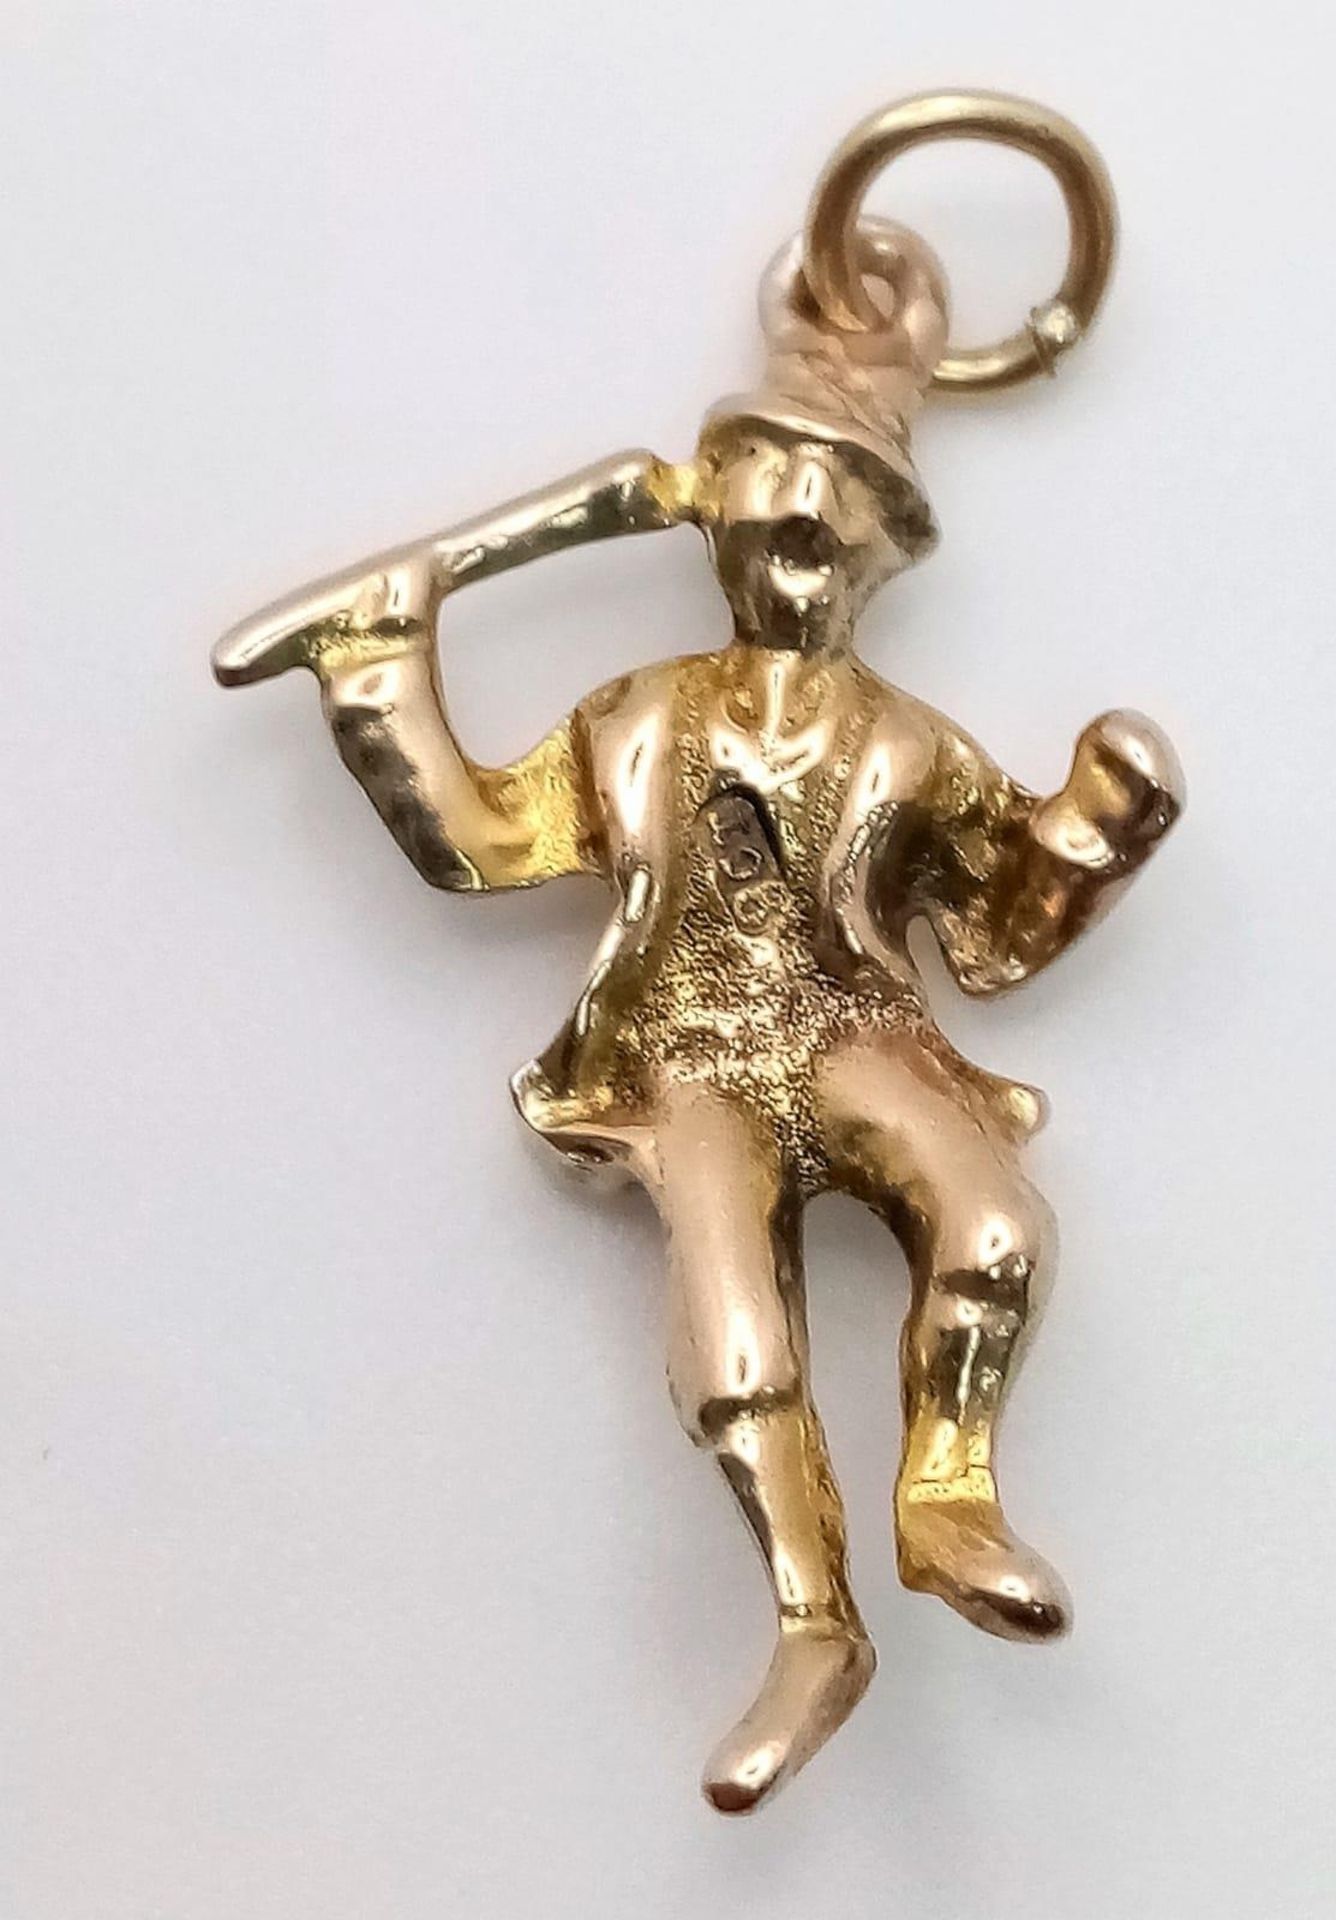 A Vintage 9K Yellow Gold Happy Chap Pendant/Charm. 3cm. 2.5g weight.